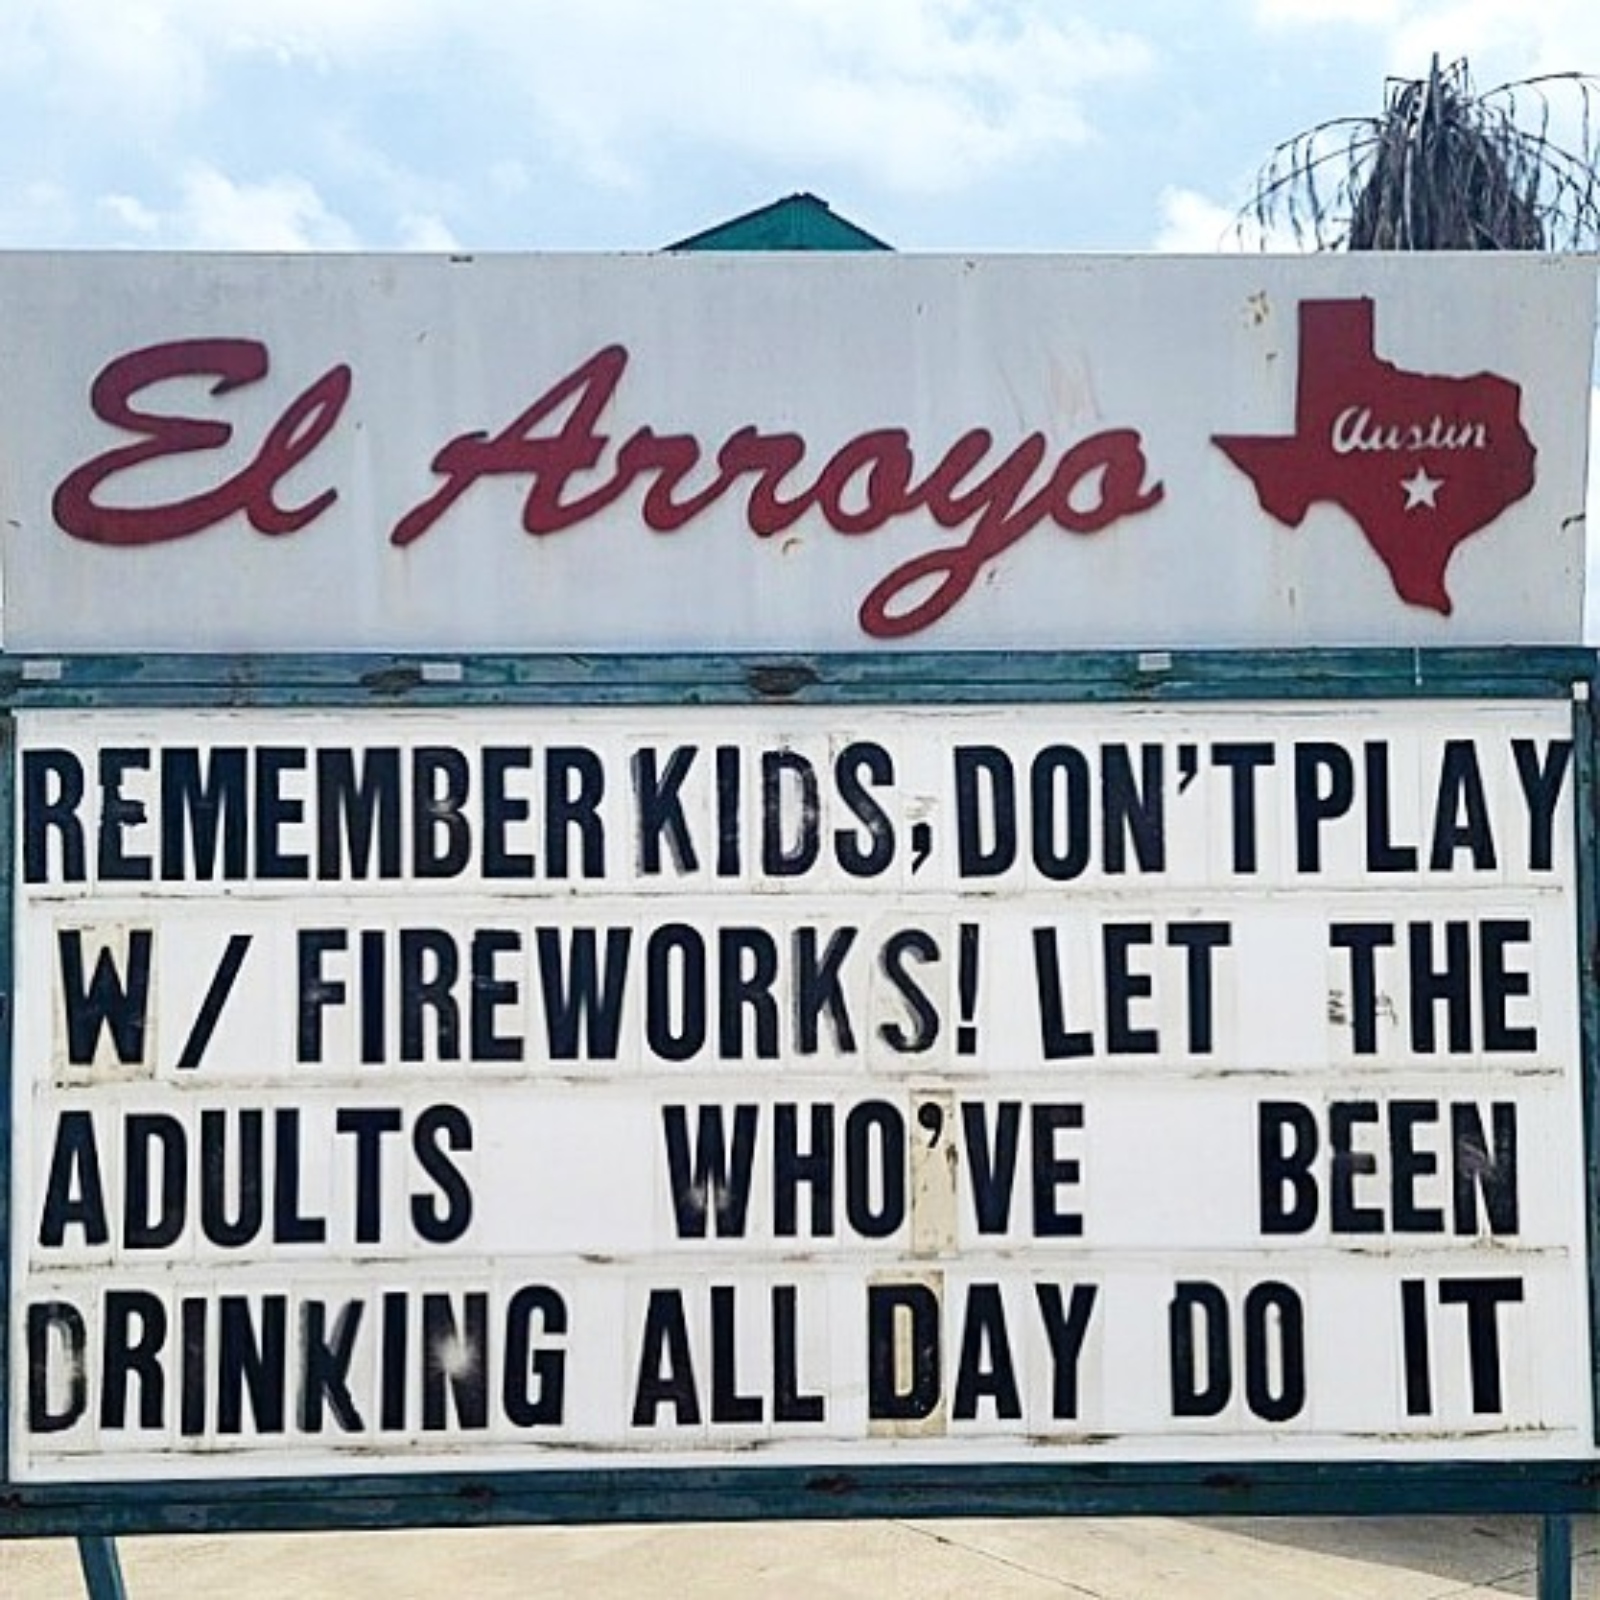 funny meme about fireworks on the 4th of July